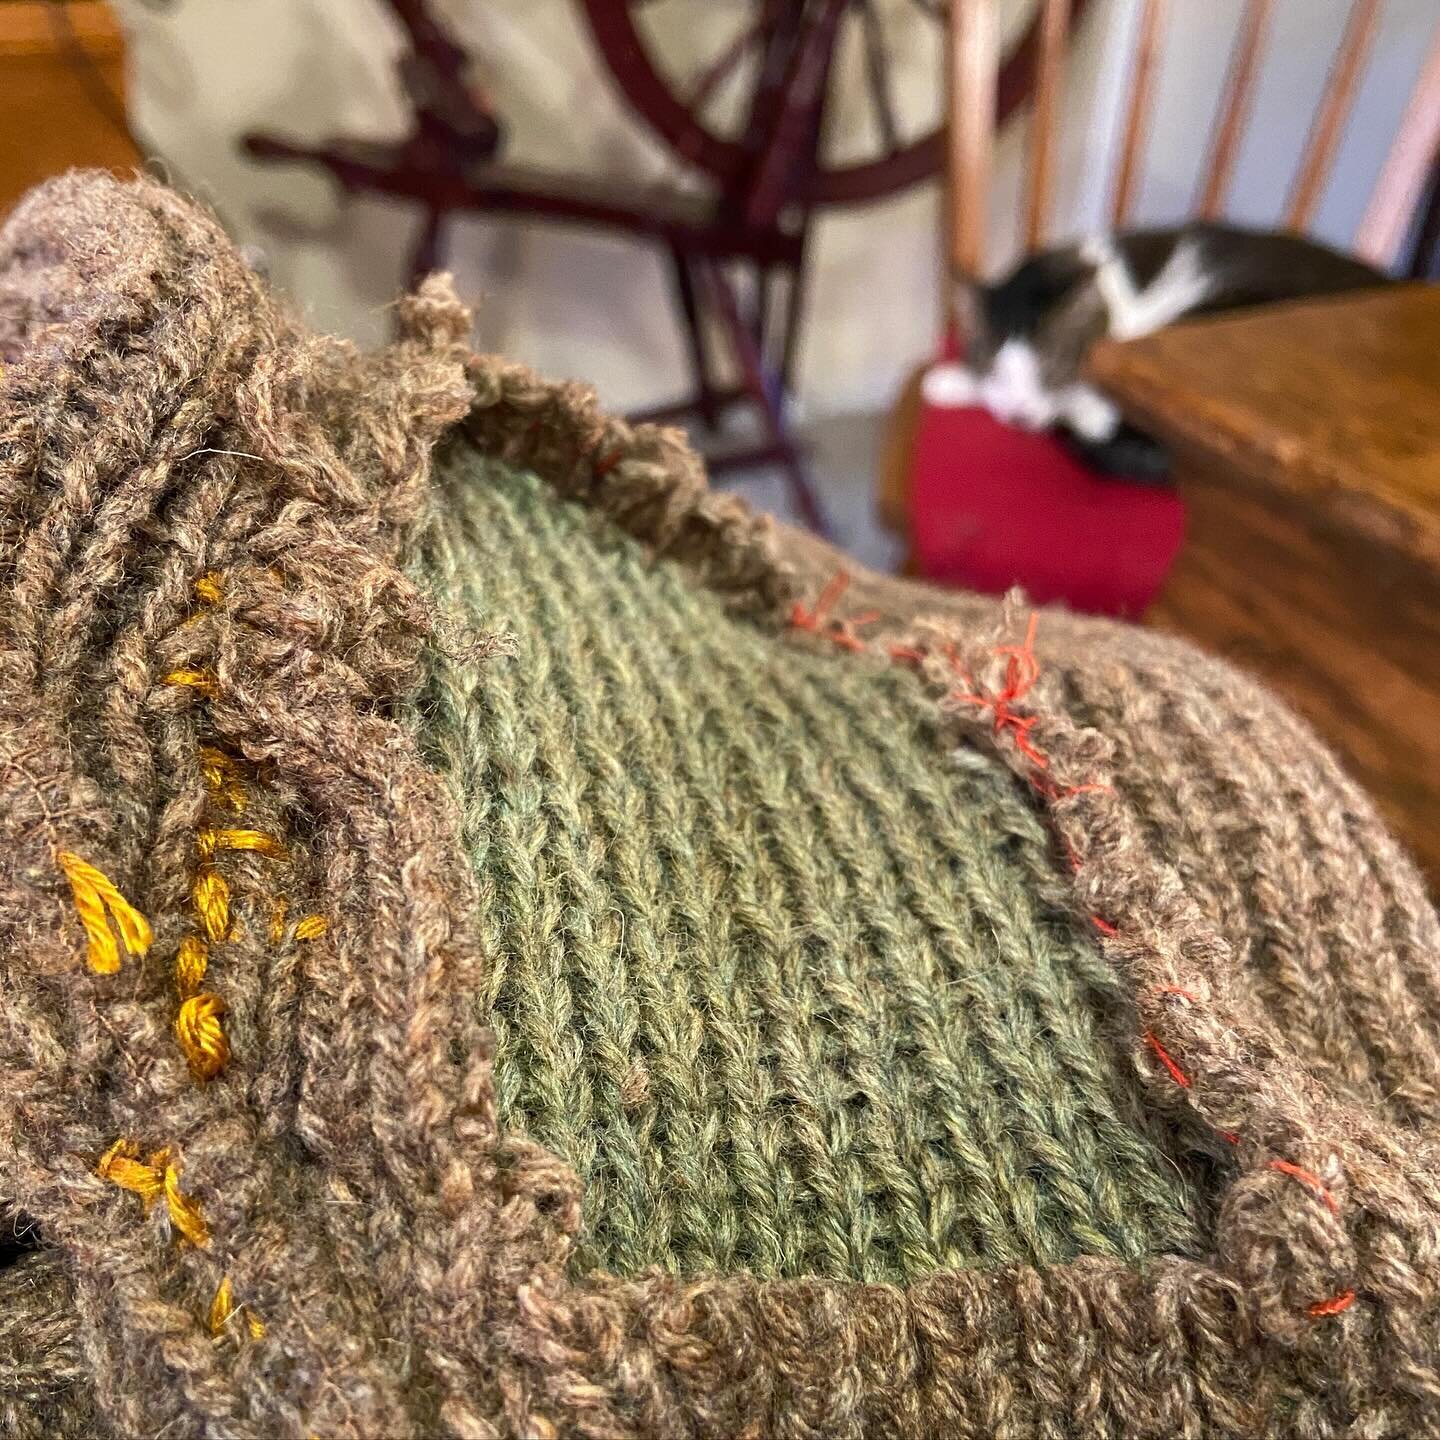 working on a big mend. it is a vintage pendleton sweater, very well-loved and well-worn by a member of my community of friends. it has about a dozen quarter-sized holes all over it plus enormous holes at the elbows and armpits. the mend is nearing co